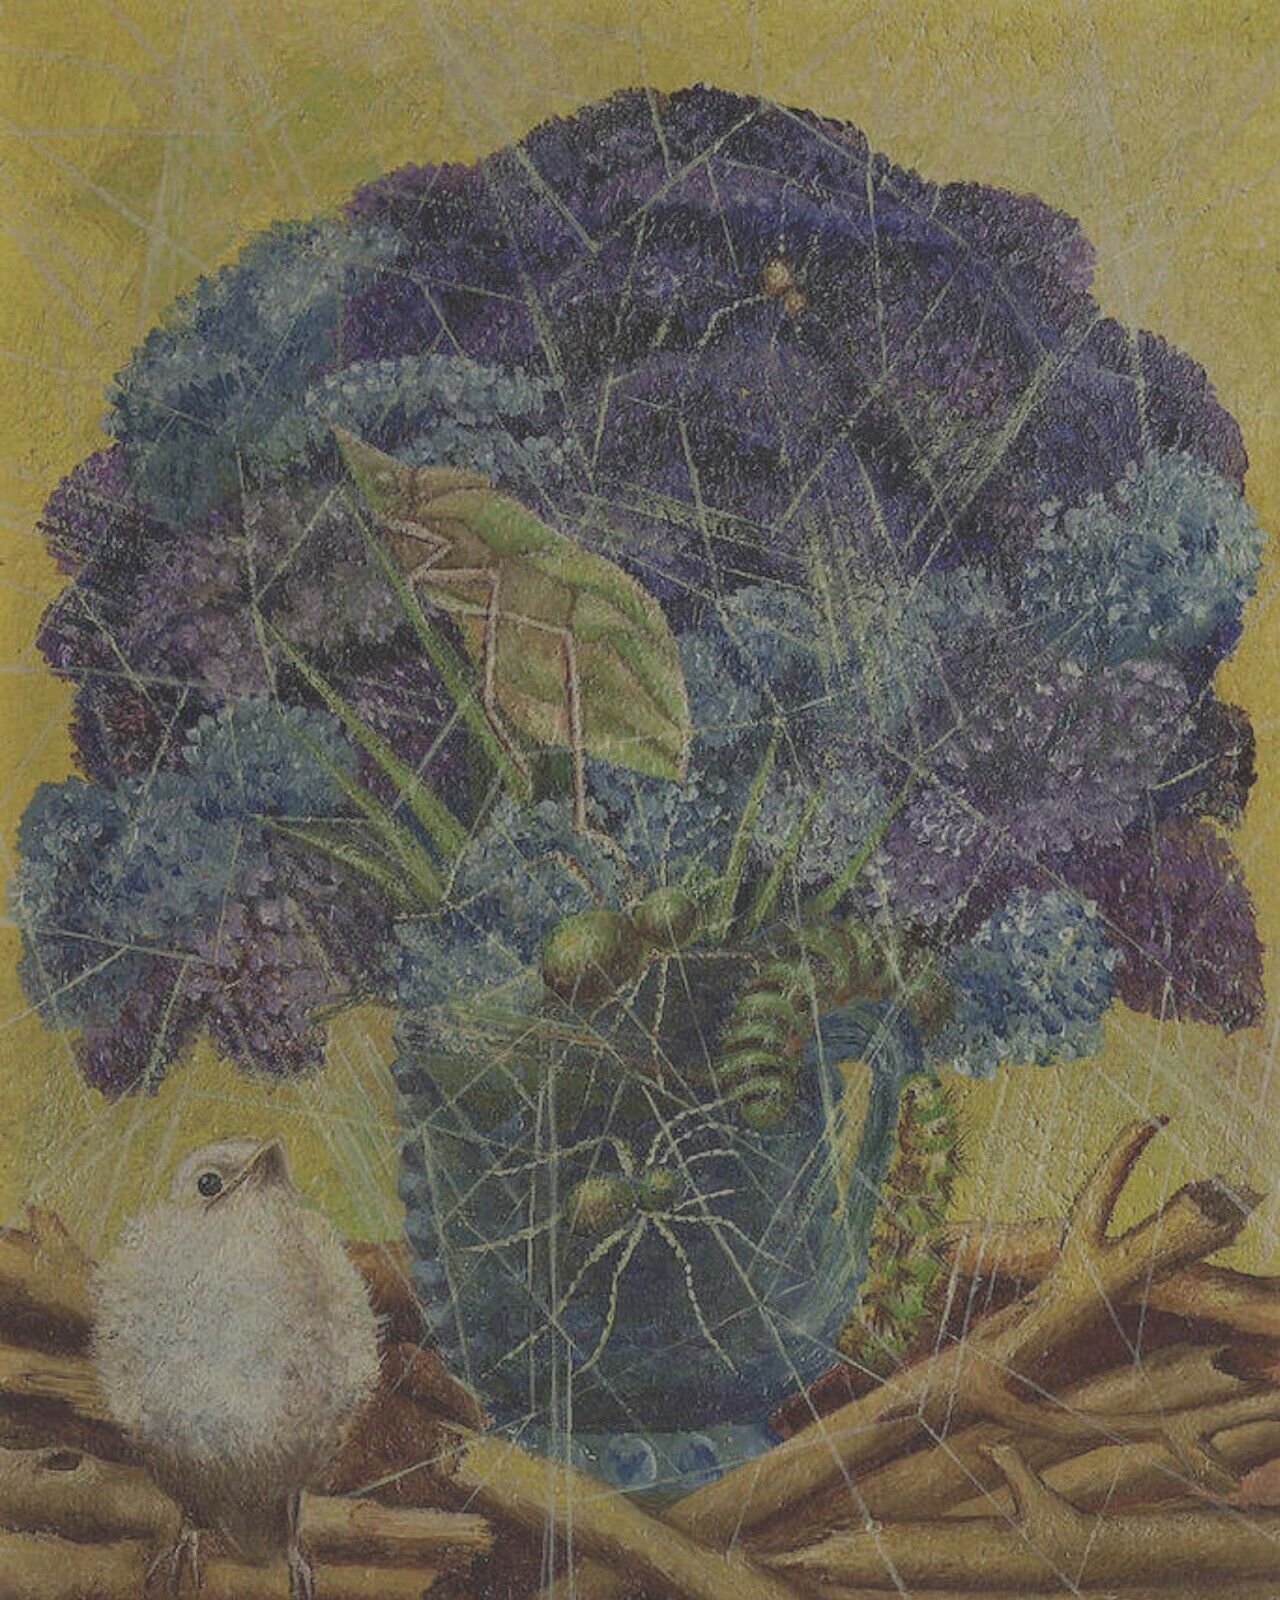 Print - The Chick, 1945 - by Frida Kahlo Без бренда